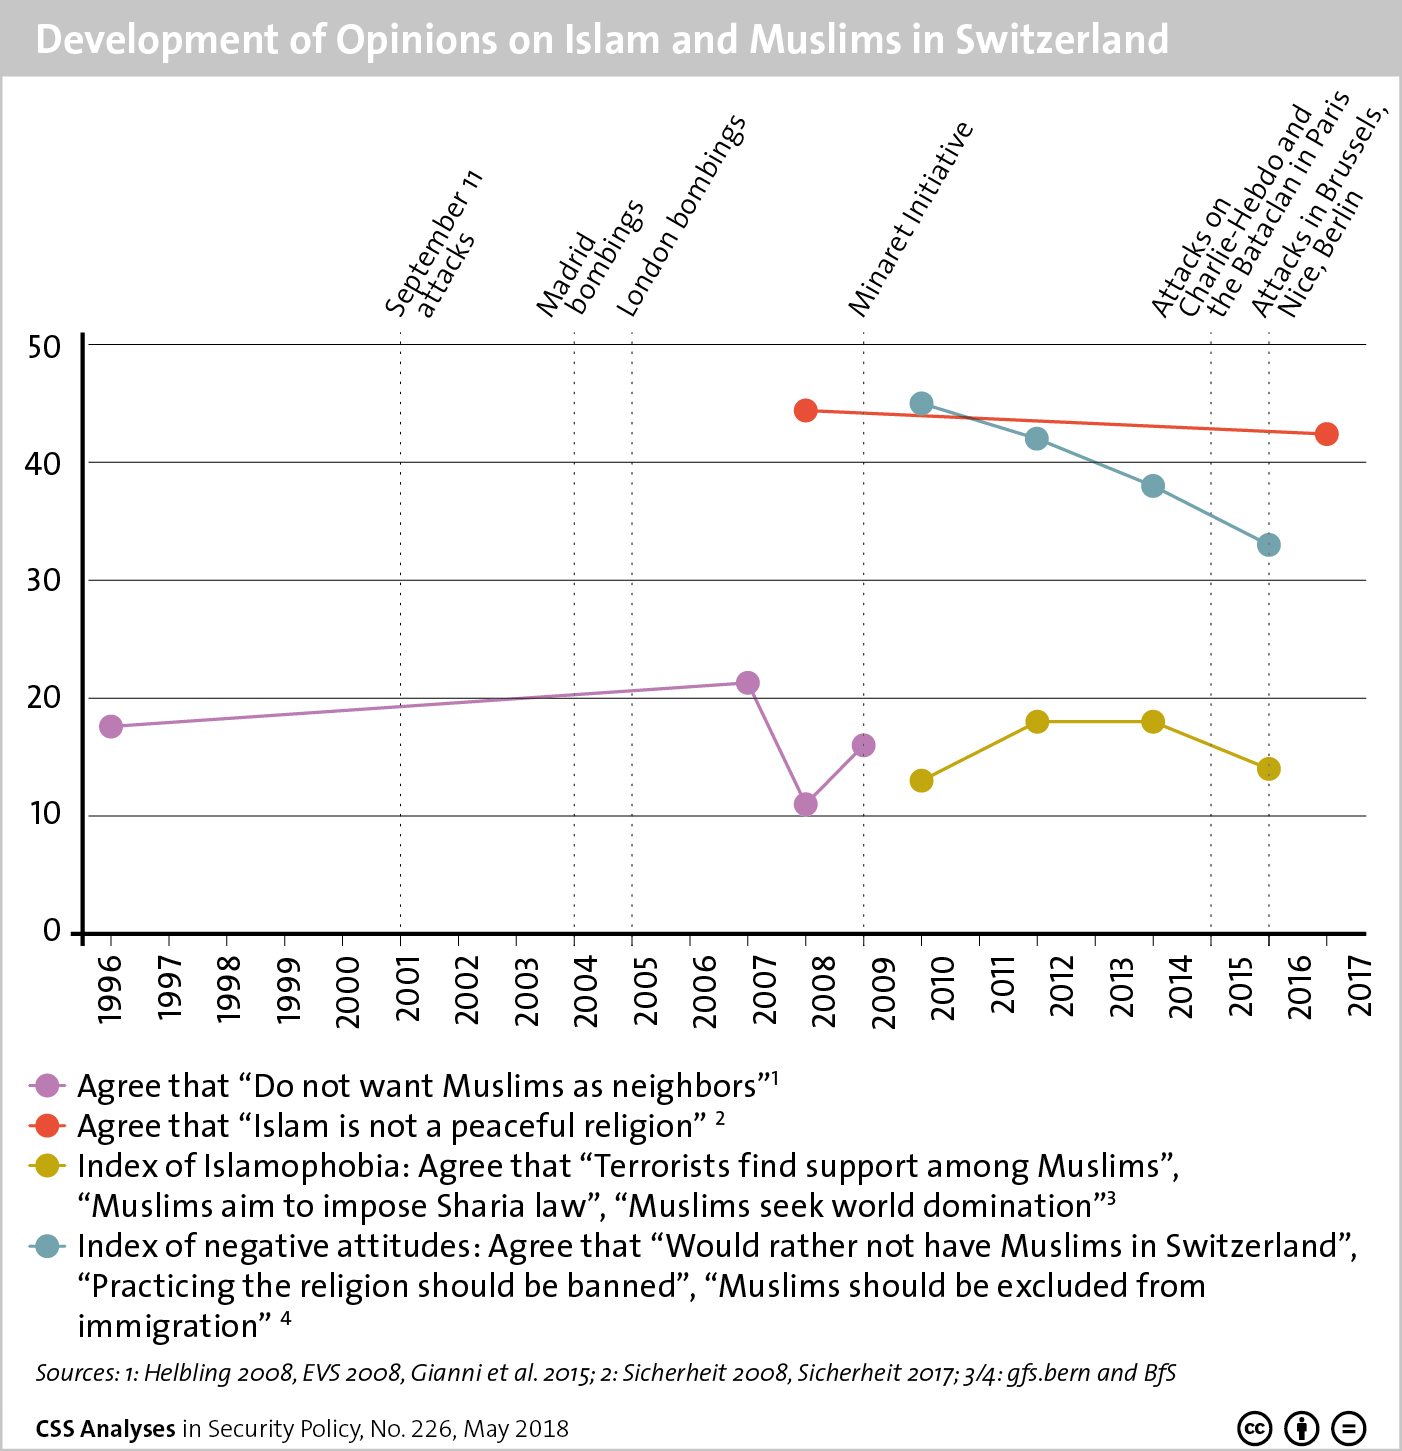 Development of Opinions on Islam and Muslims in Switzerland